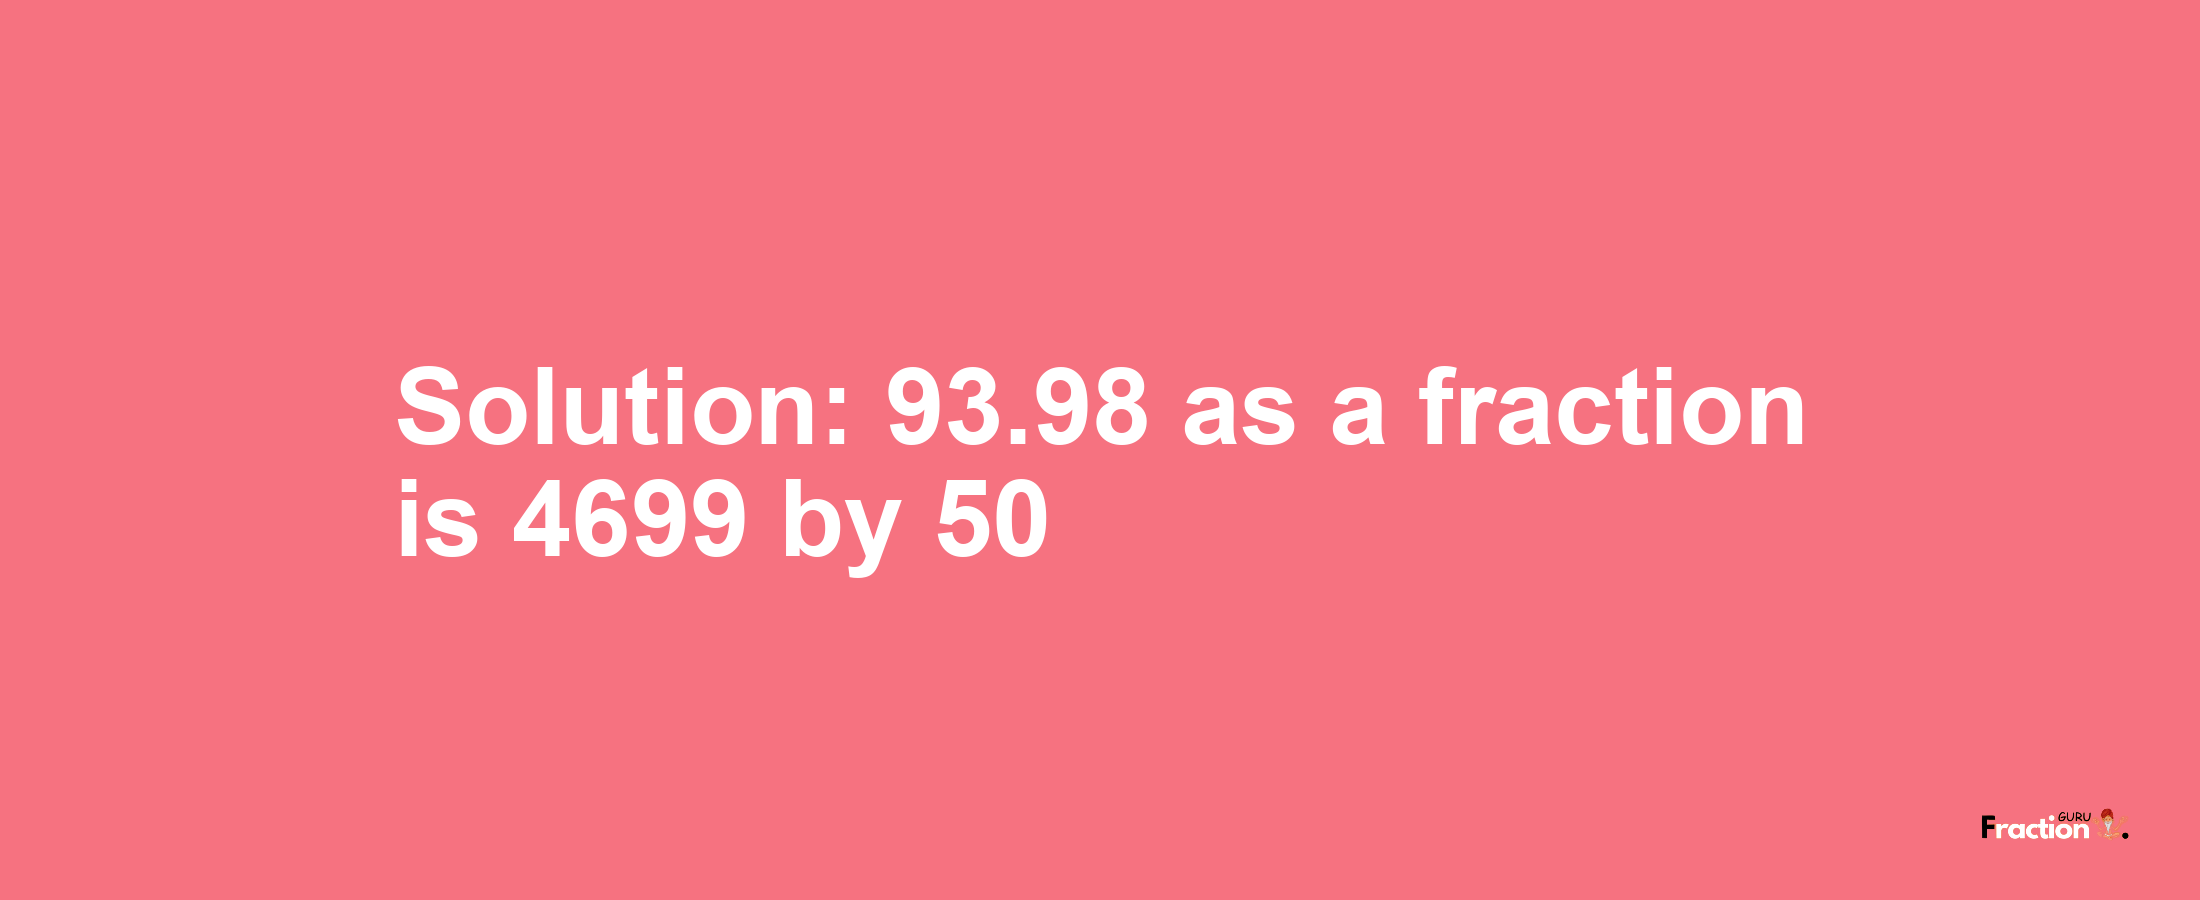 Solution:93.98 as a fraction is 4699/50